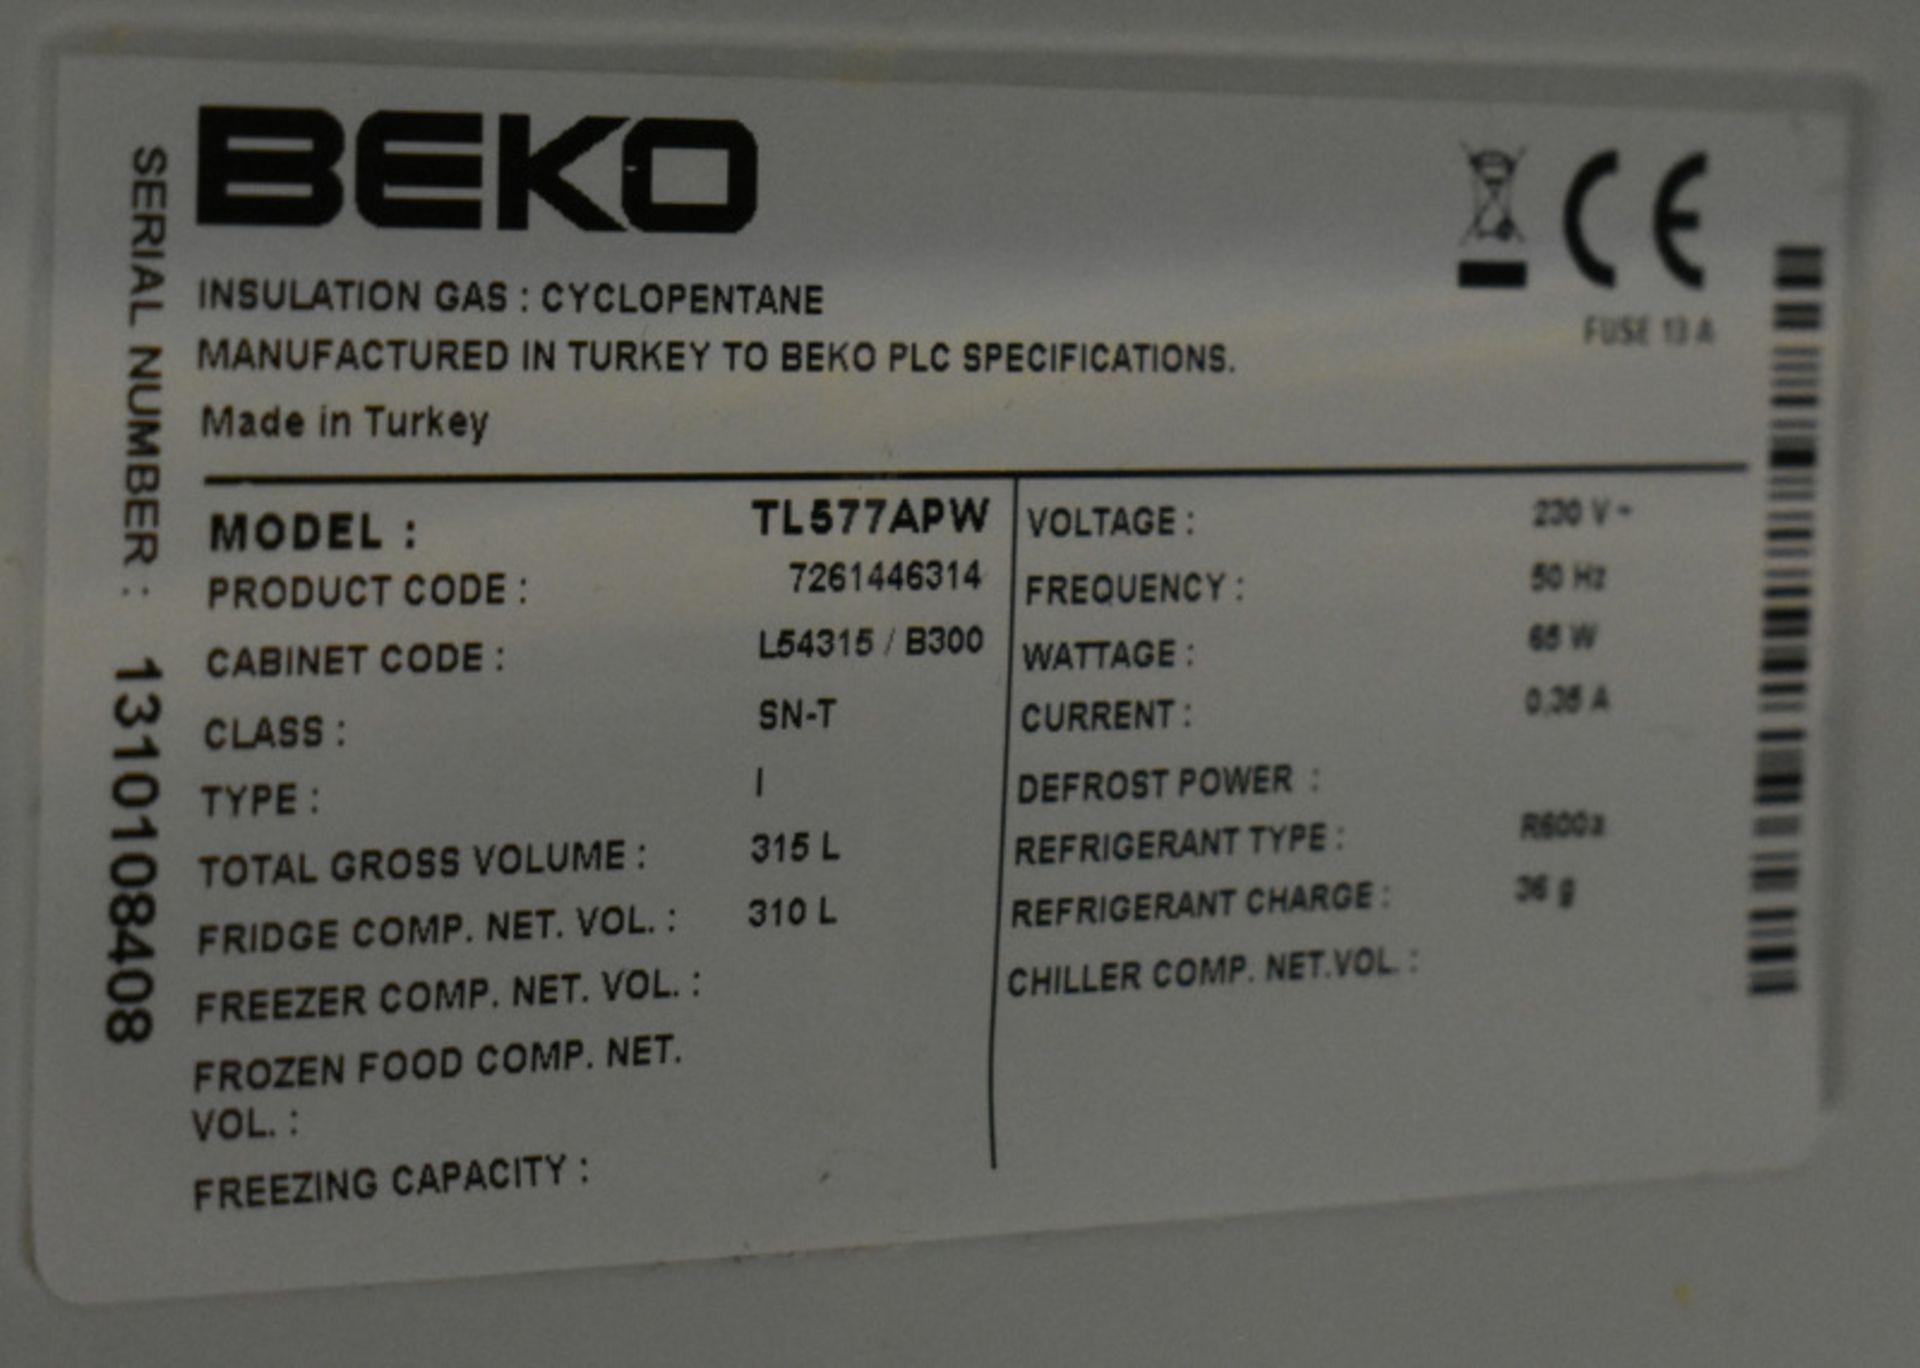 Beko TL577APW A+ Class Fridge Tall - L 580mm x W 580mm x H 1780mm - Image 4 of 4